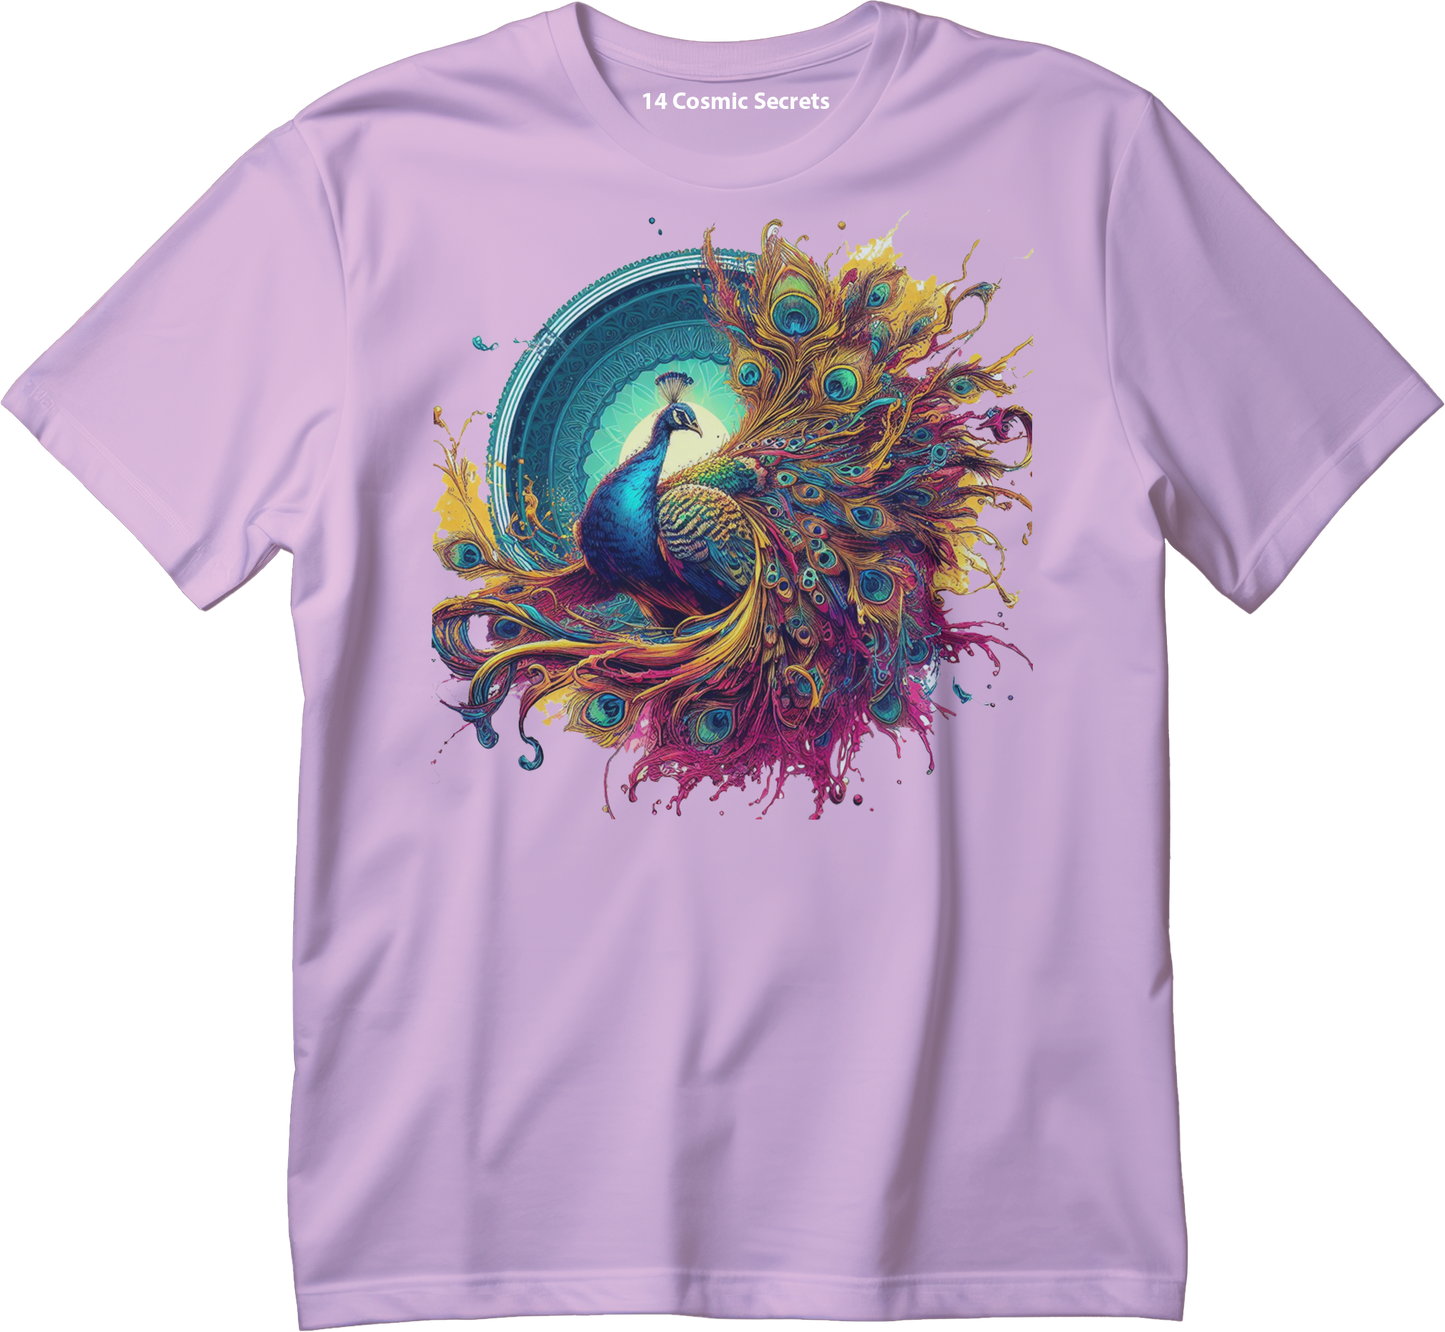 The Amazing Peacock Graphic Printed T-Shirt  Cotton T-Shirt Magnificence of India T-Shirt